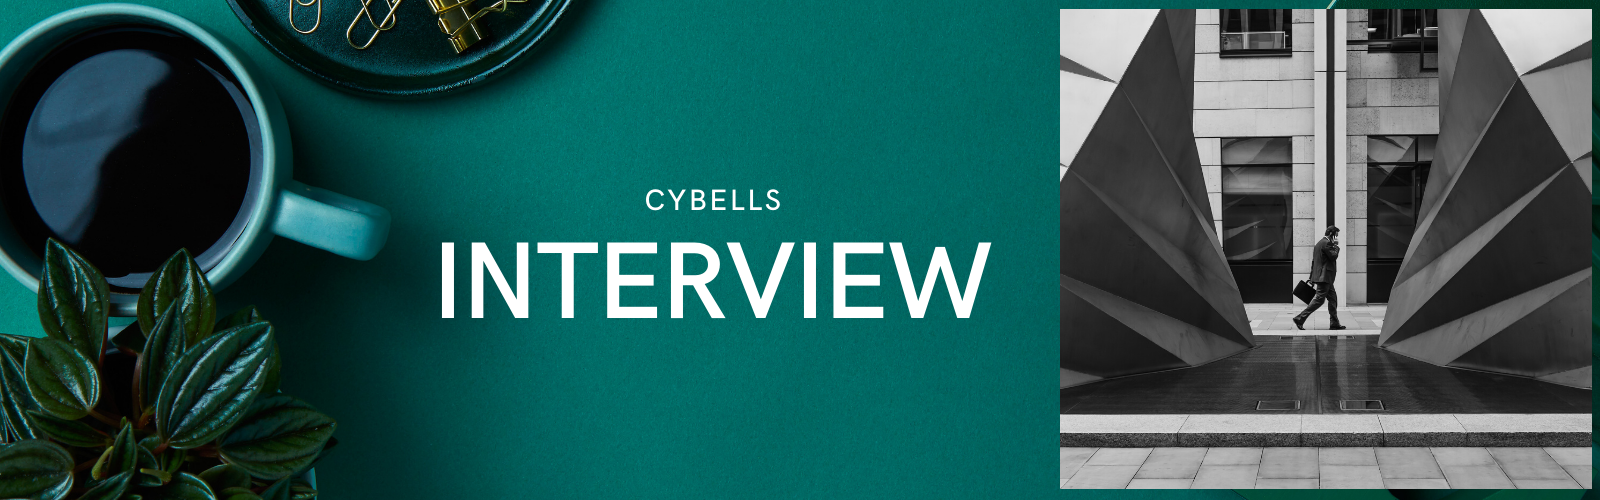 CYBELLS IS HIRING NOW